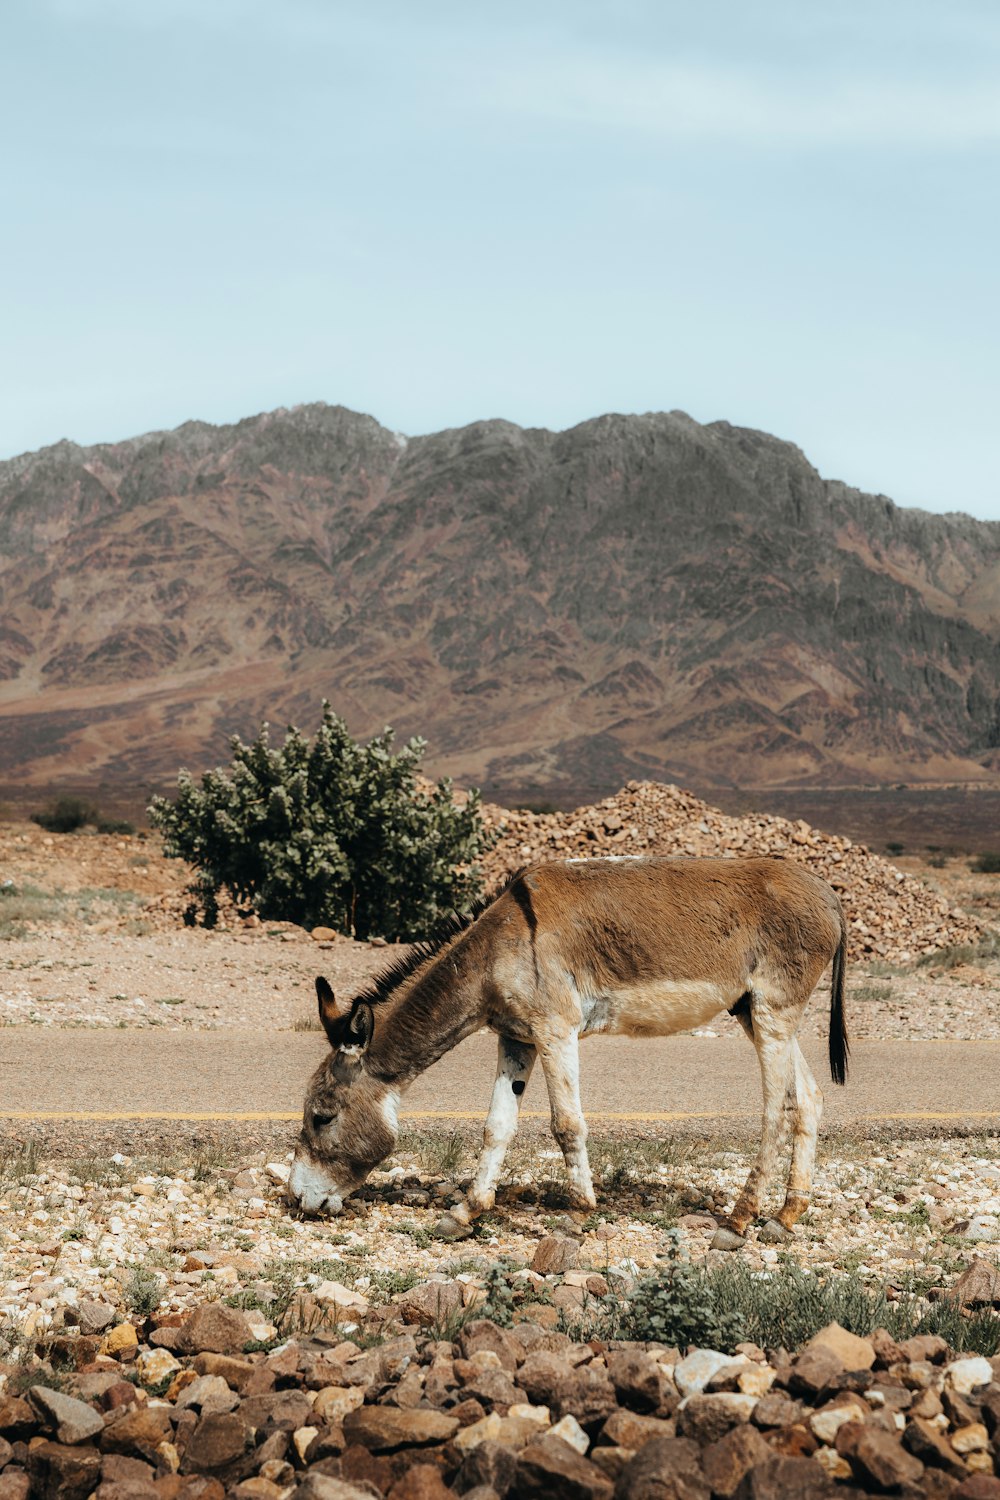 a donkey grazing in a rocky field with mountains in the background